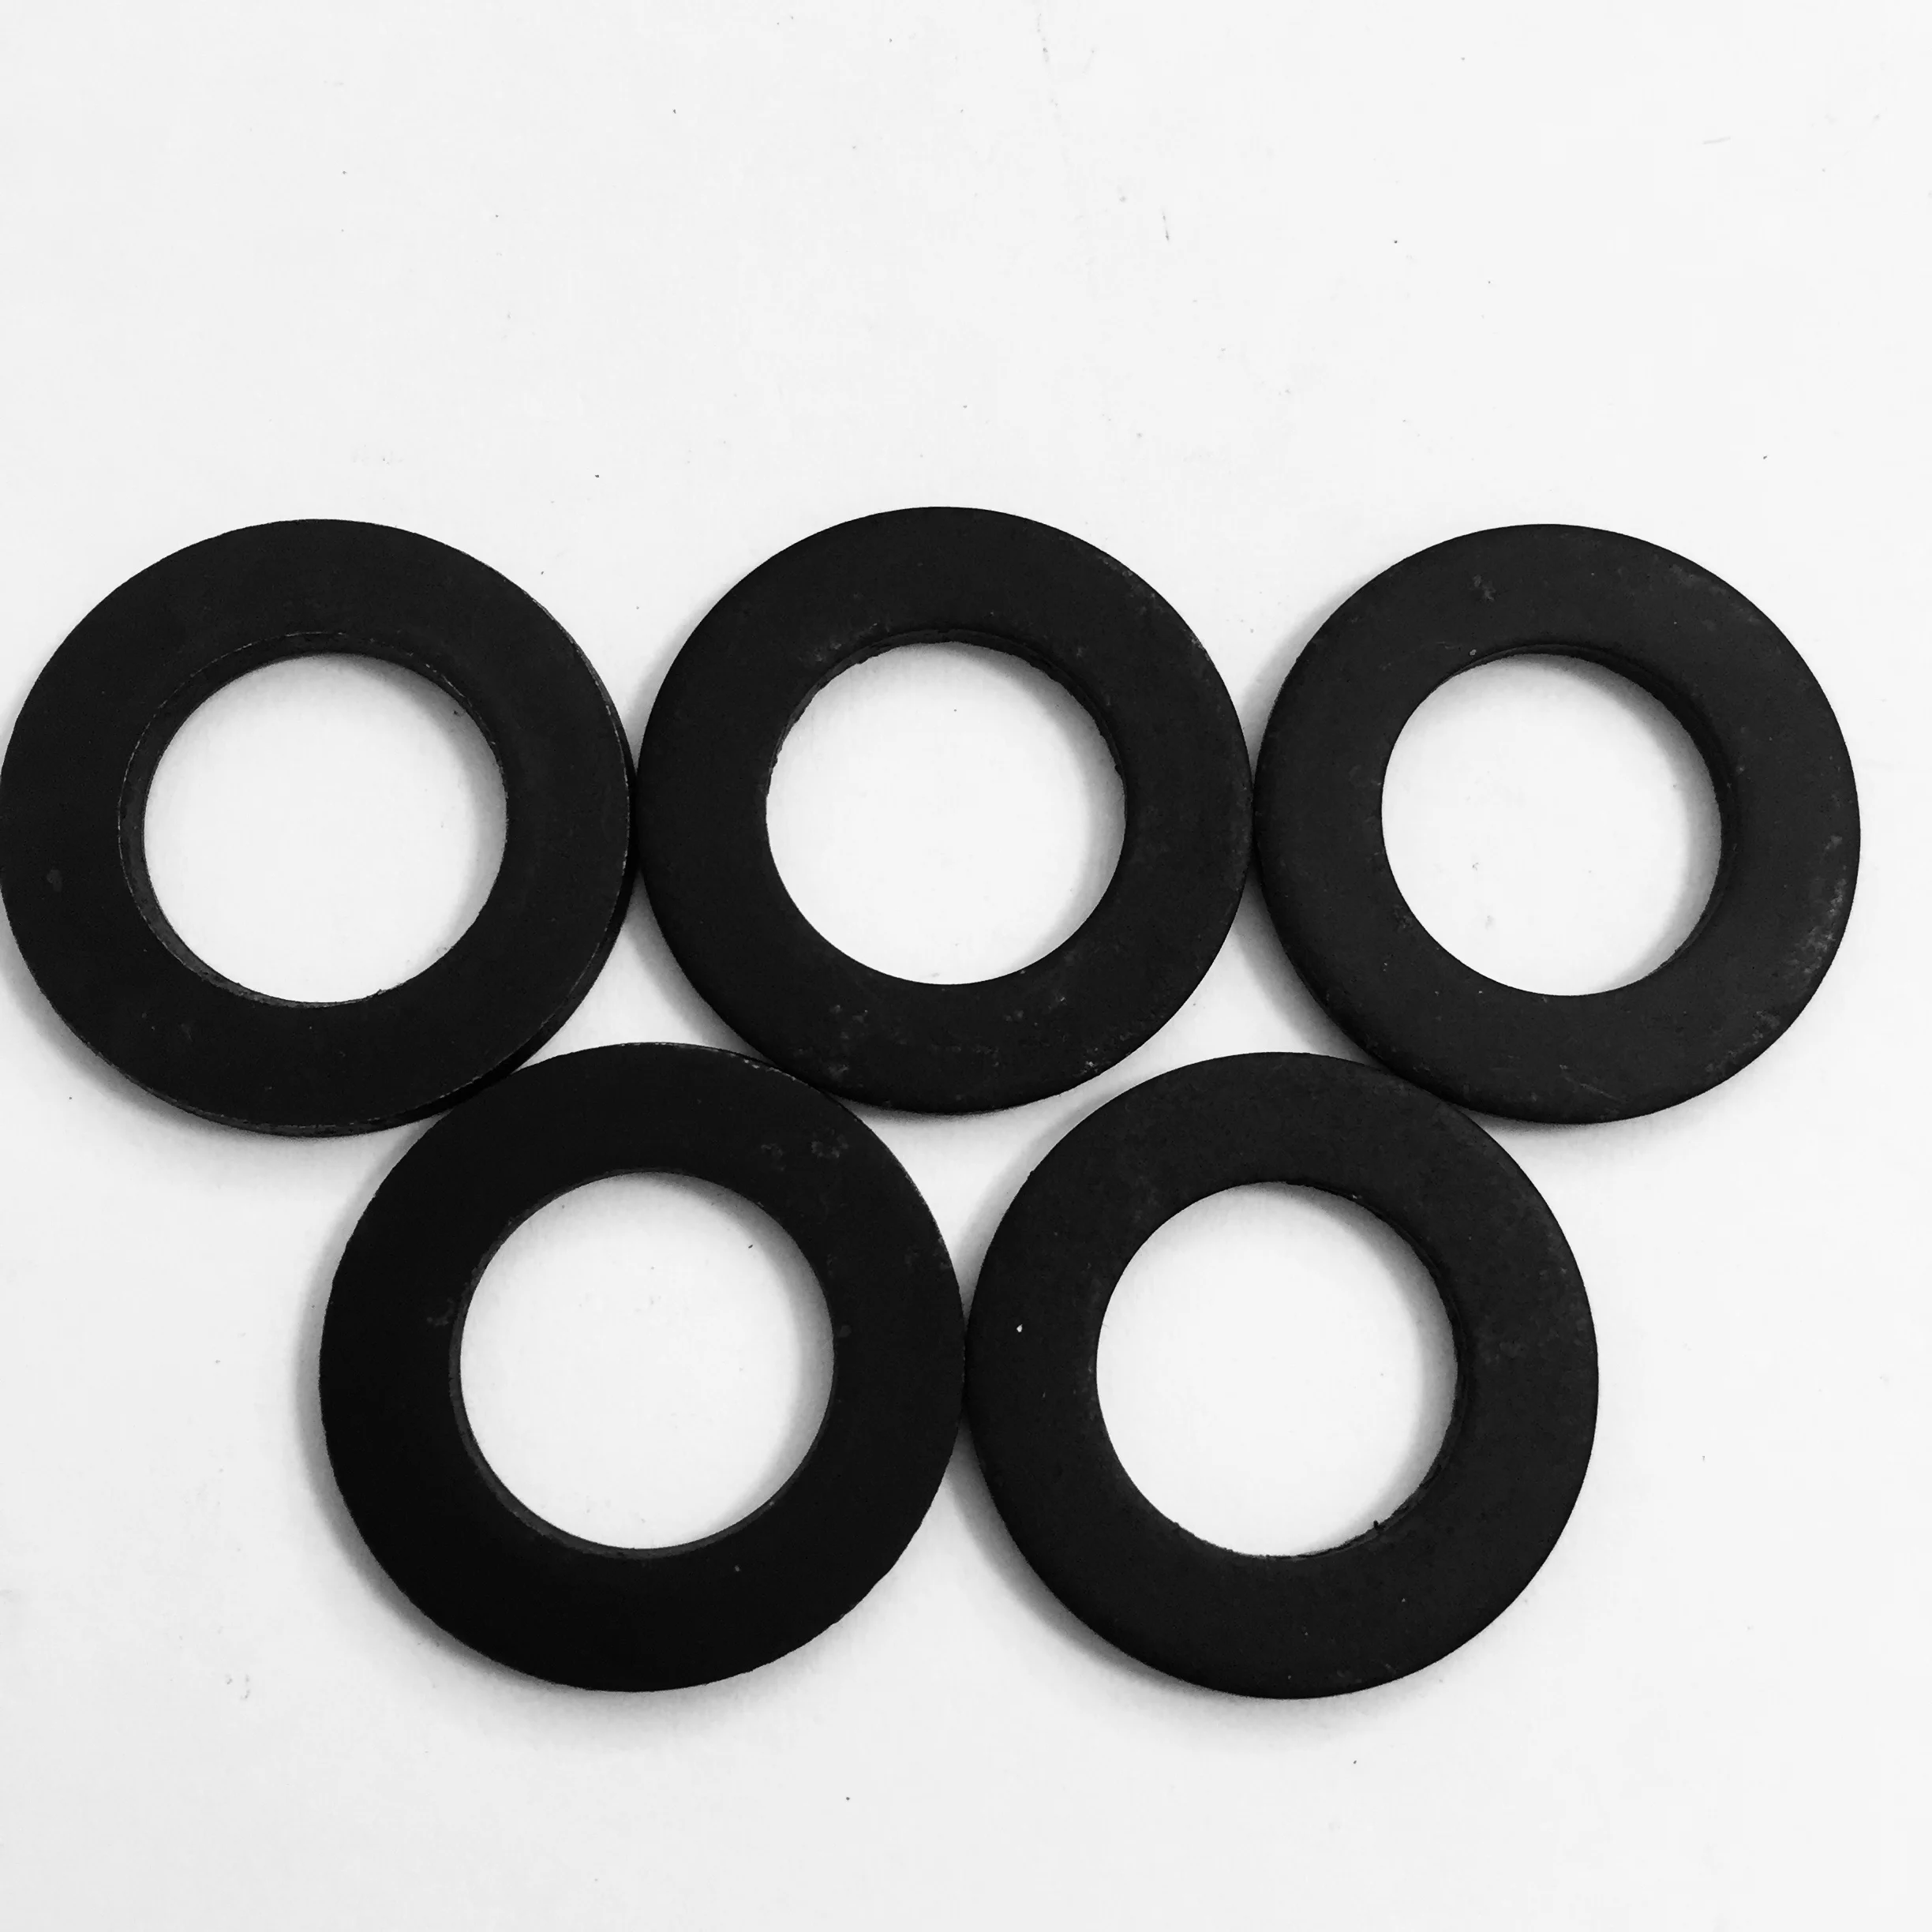 5/16" Black Oxide Stainless Steel Flat Washer Qty 250 